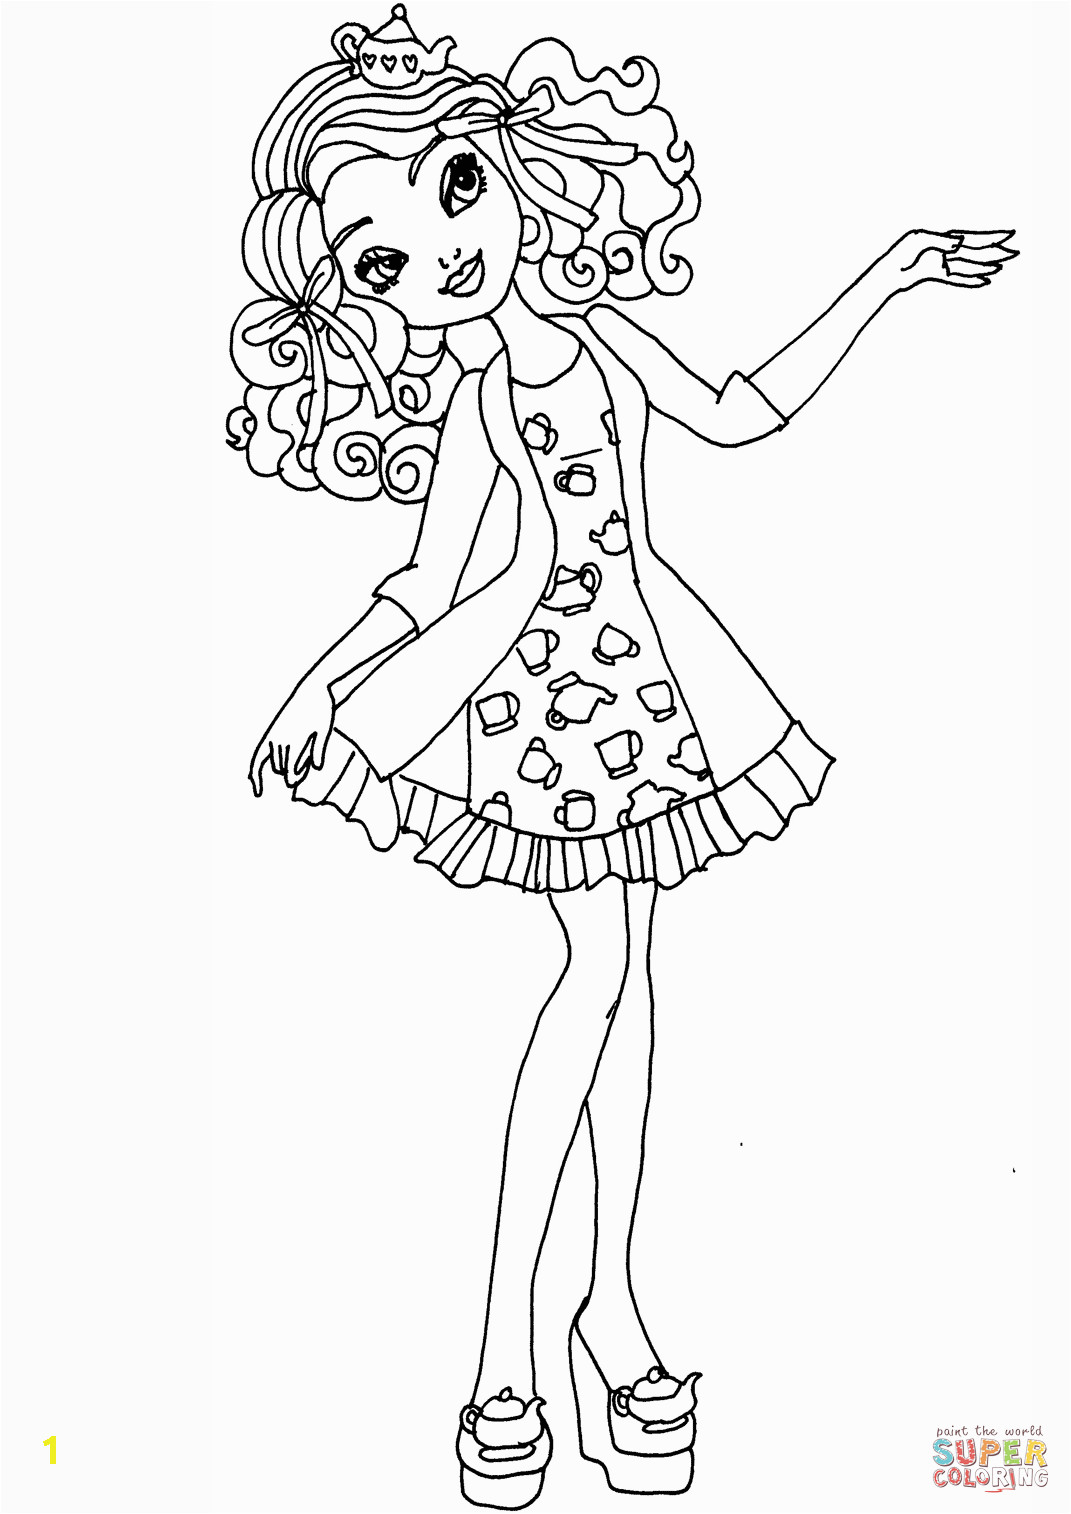 Ever after High Coloring Pages Madeline Hatter Ever after High Coloring Pages Madeline Hatter at